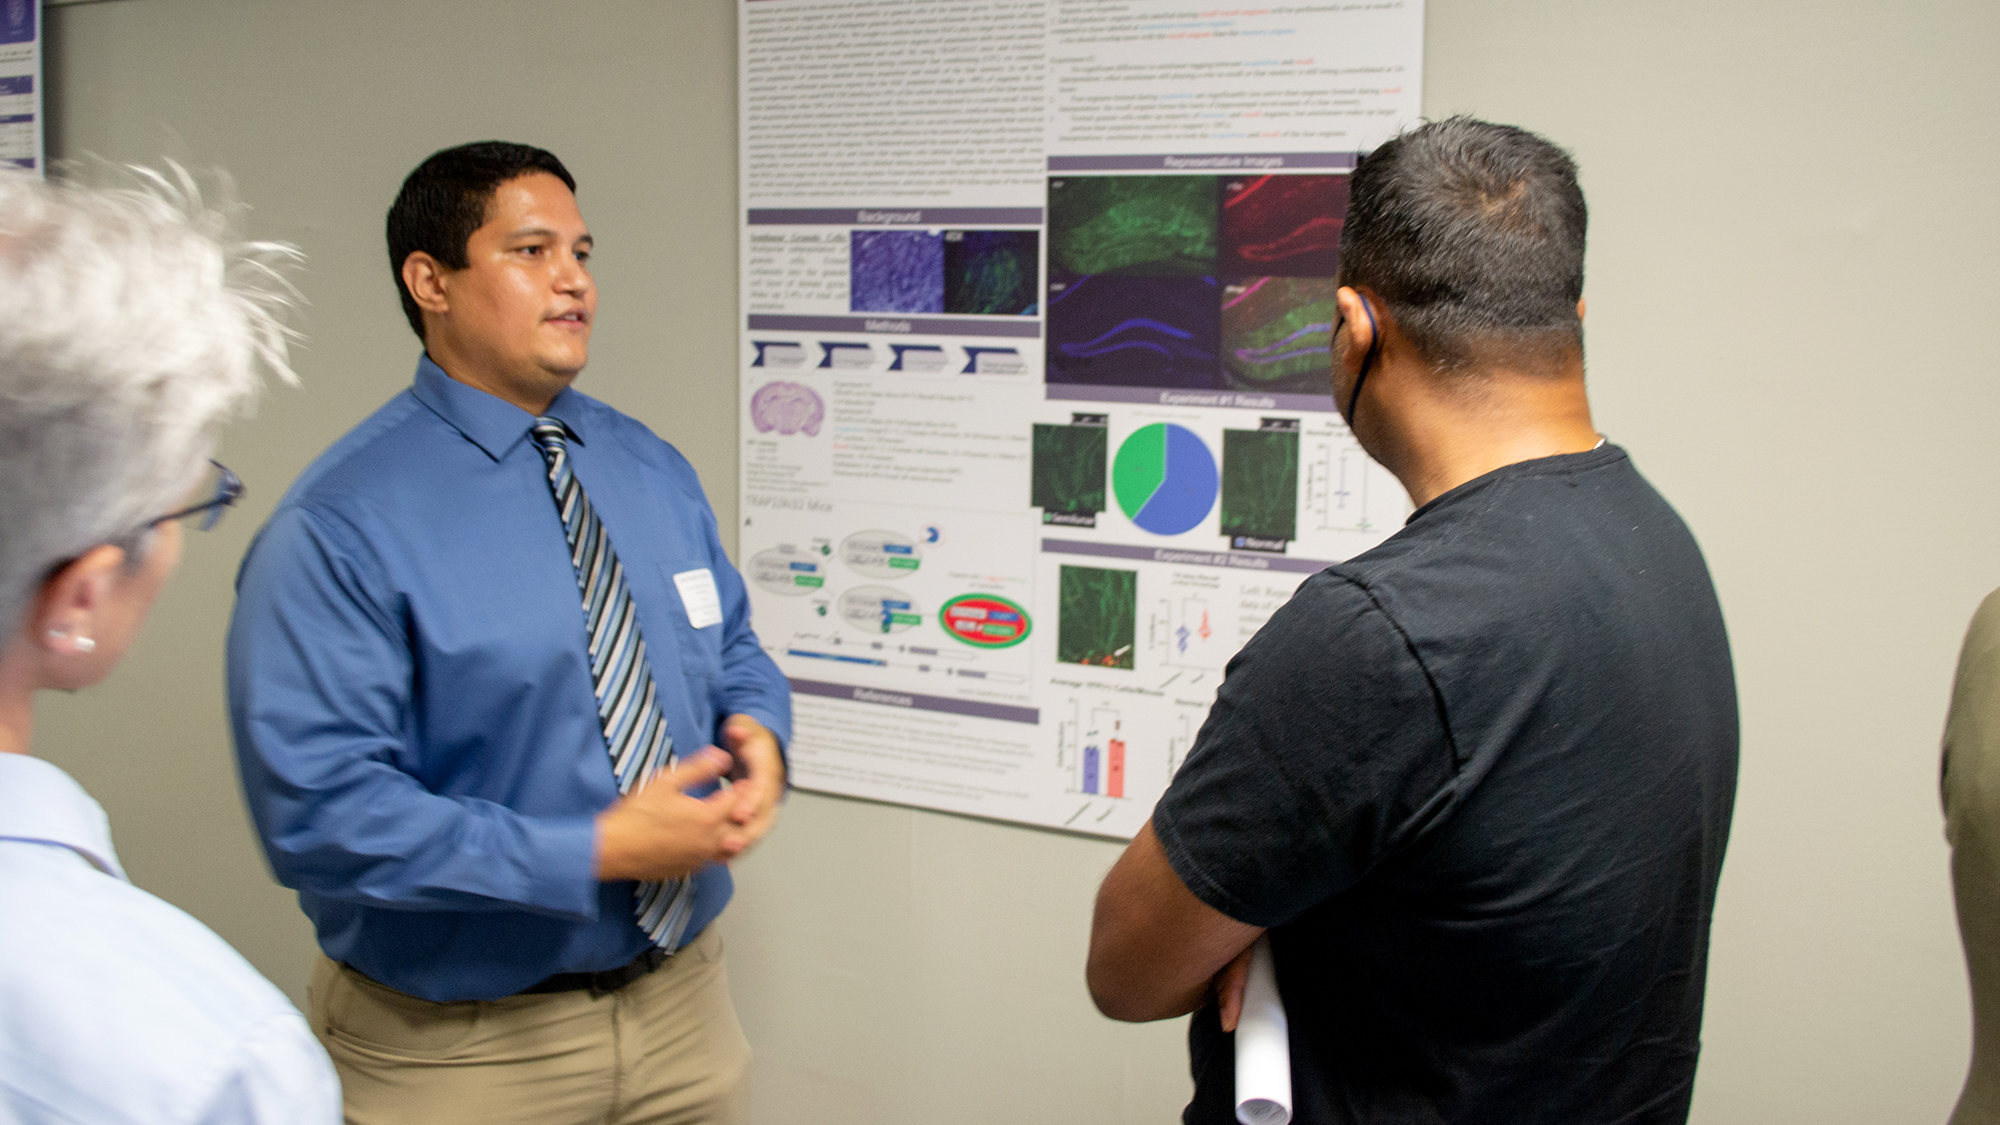 A student stands in front of his poster talking to two other people